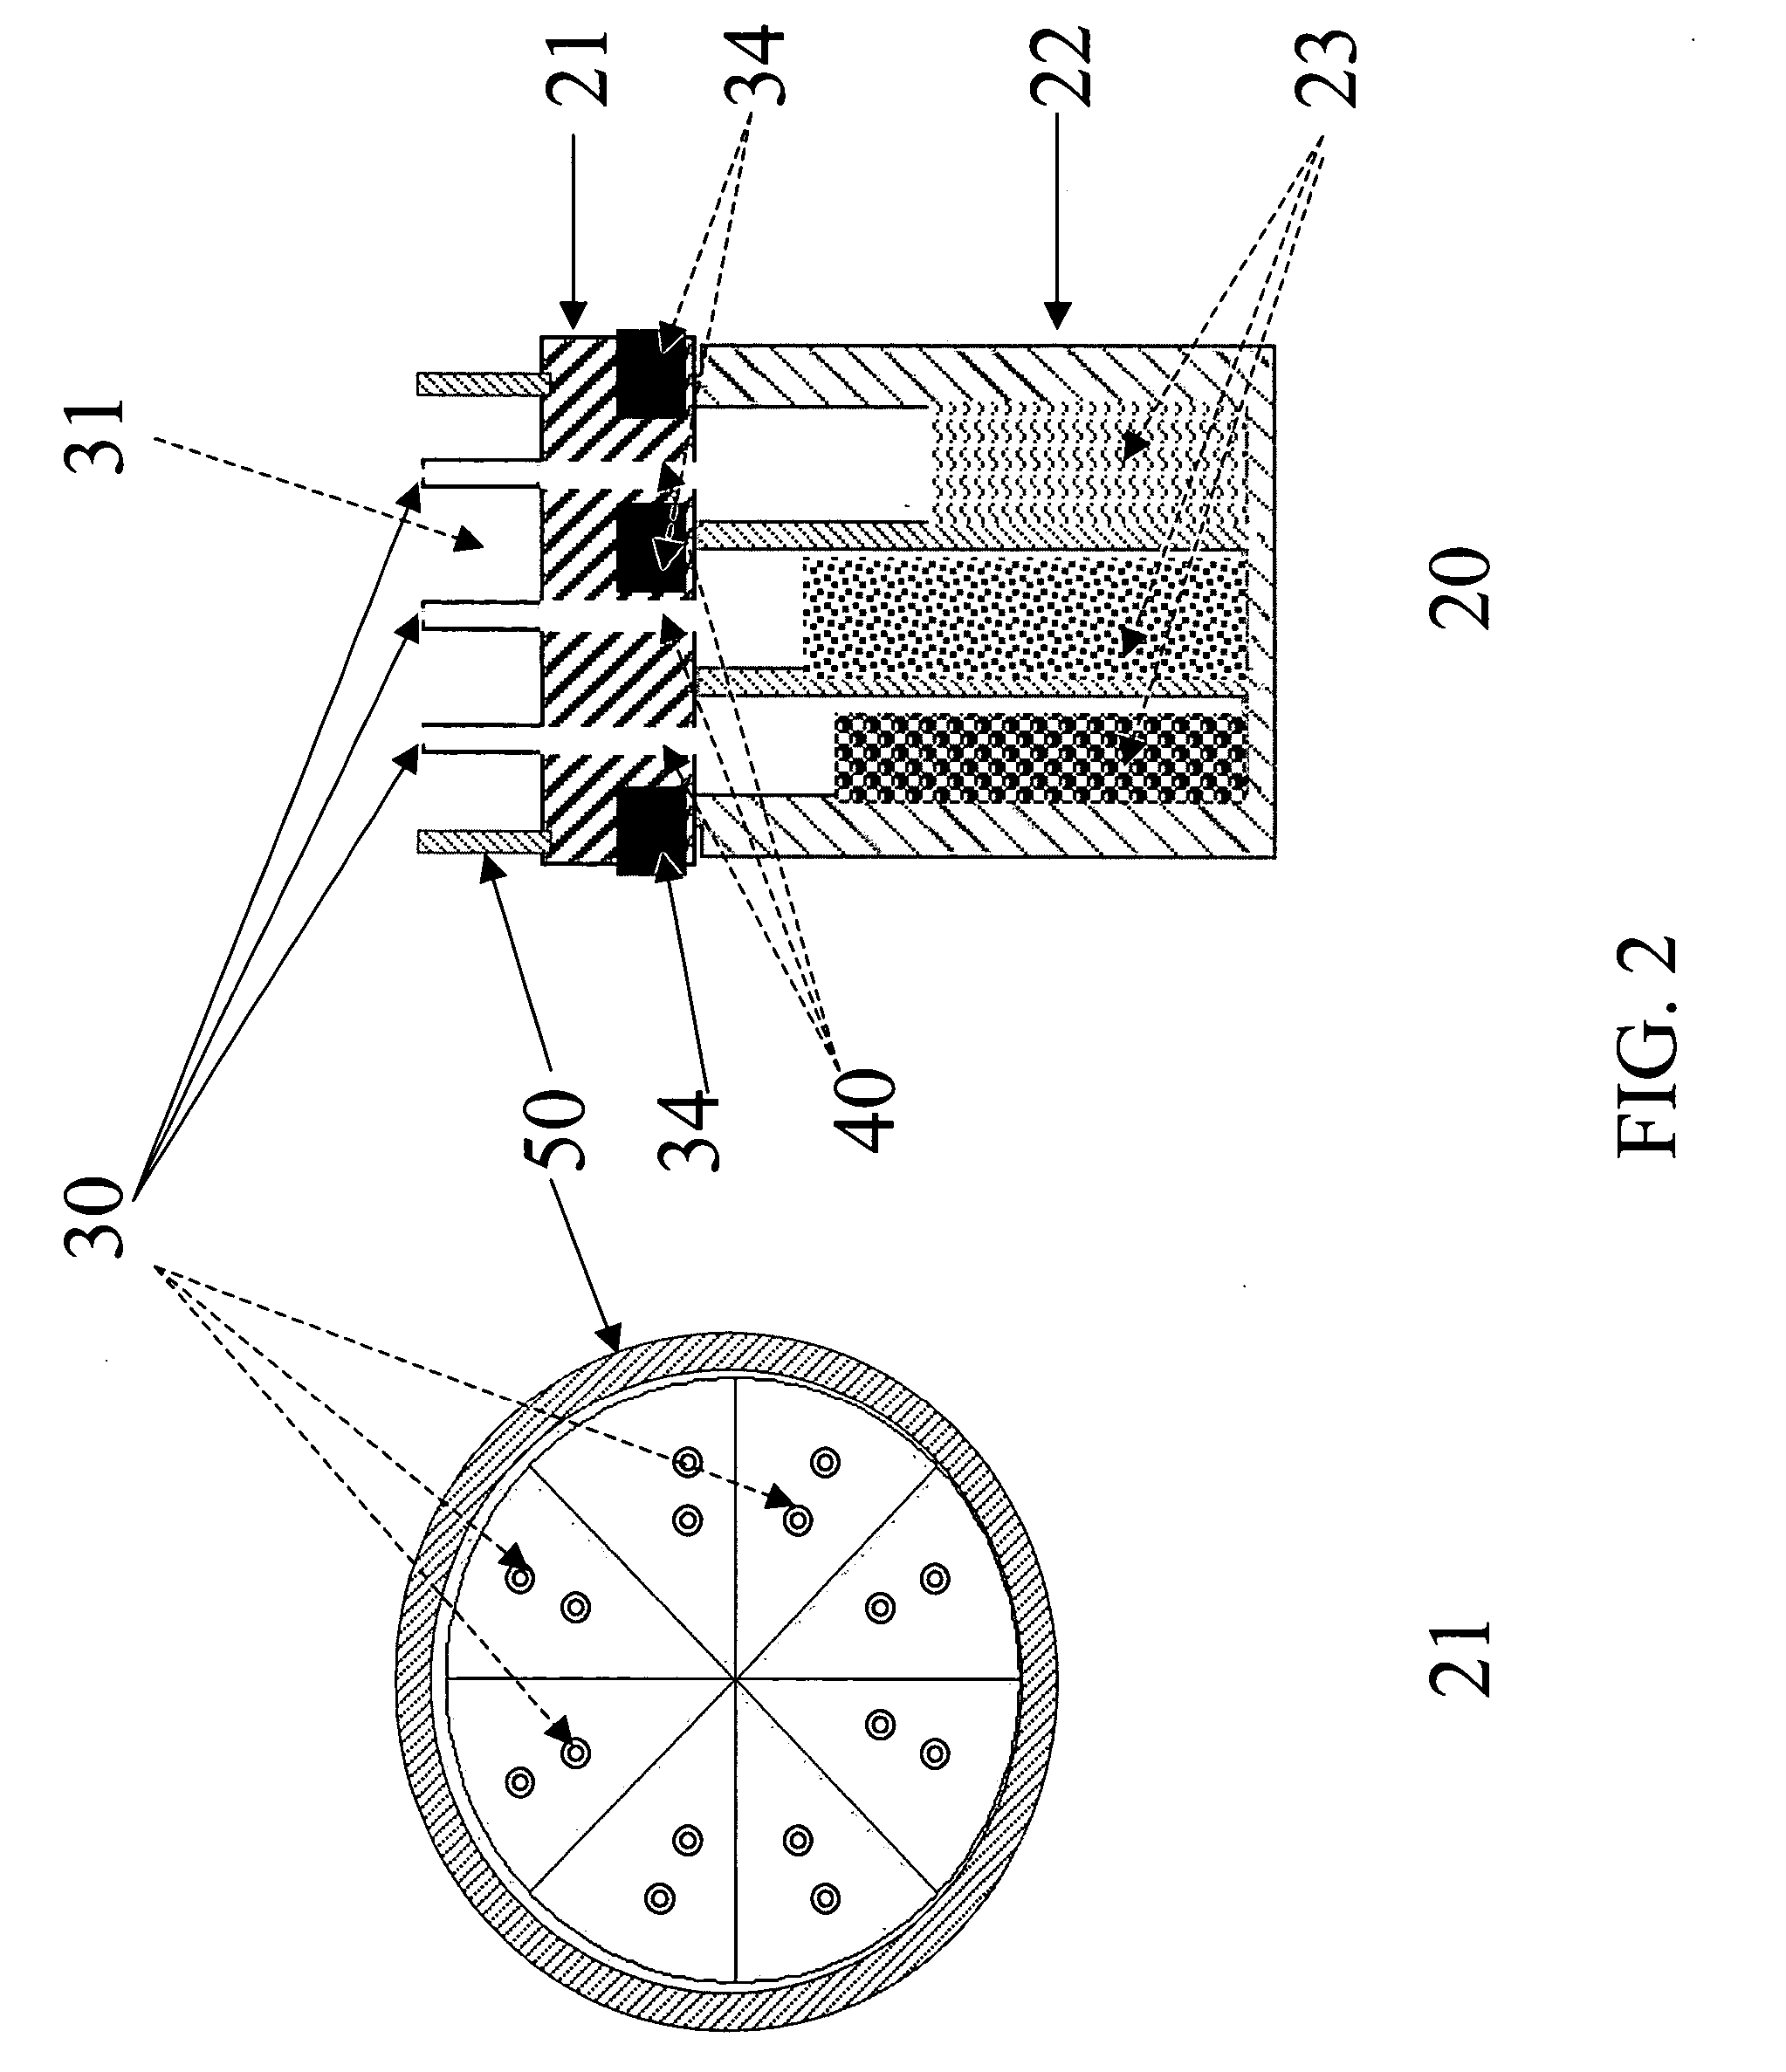 Replaceable electrostatically sprayable material reservoir for use with a electrostatic spraying device